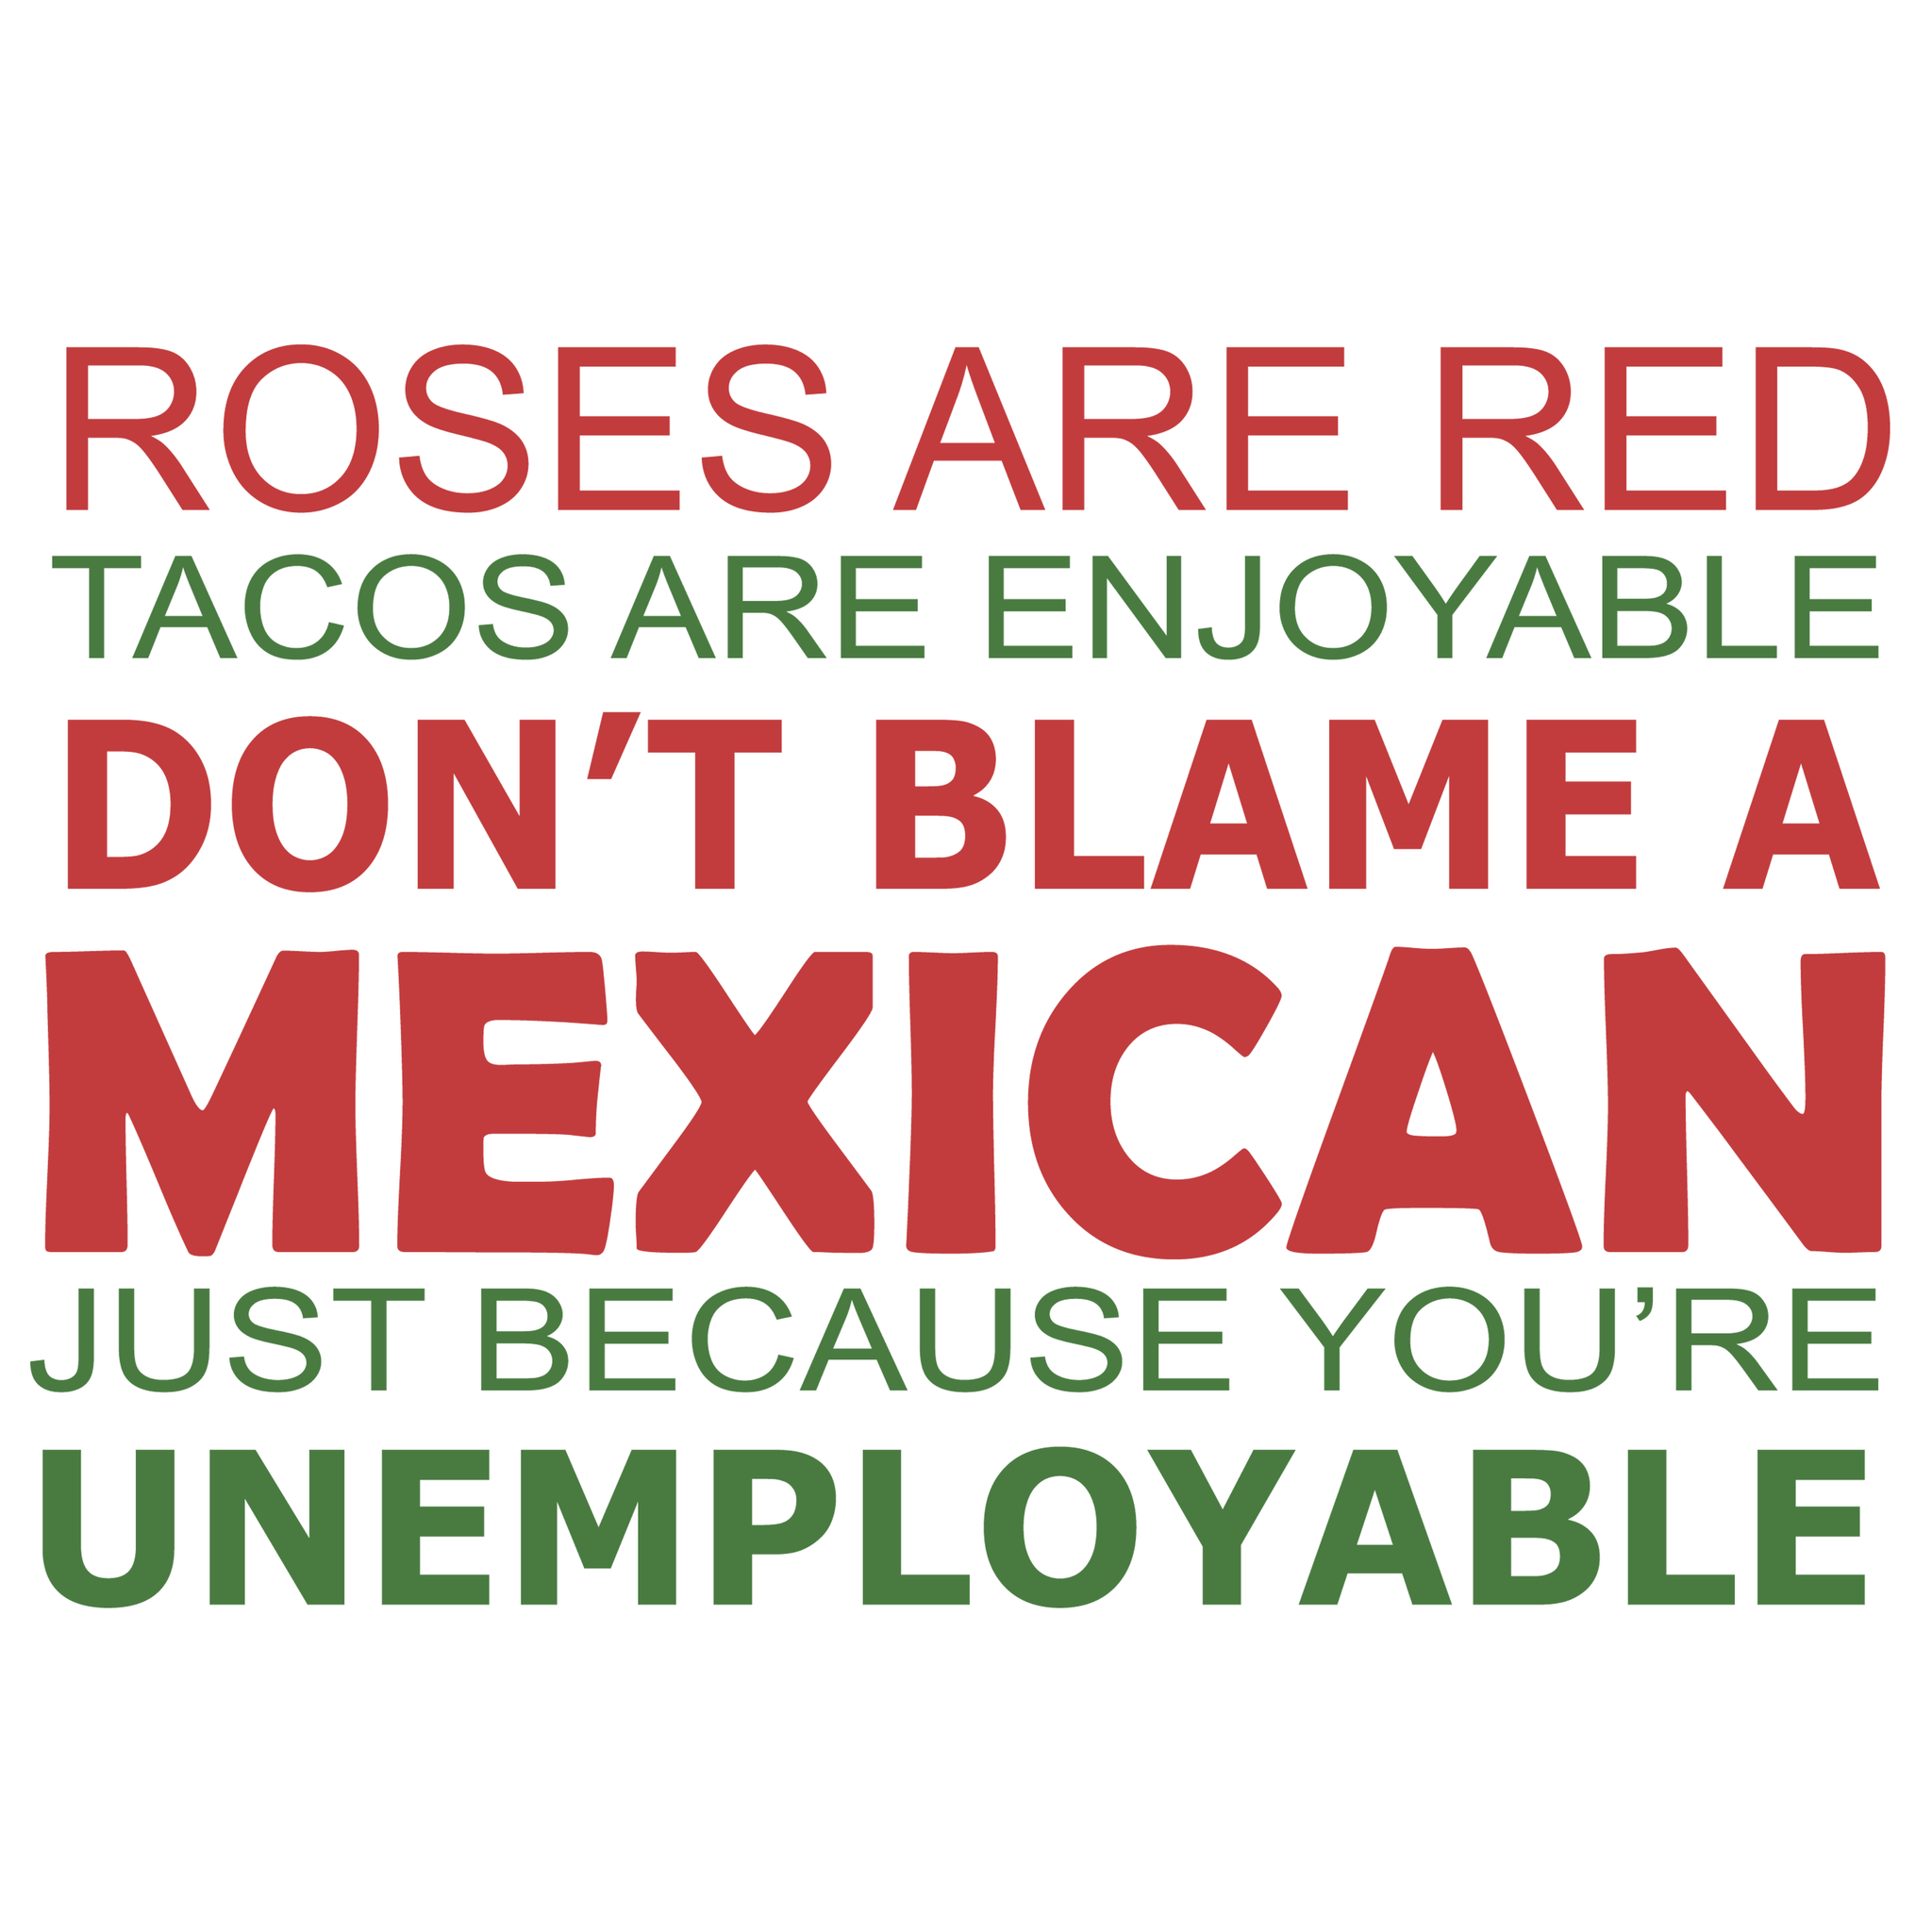 Roses and red tacos are enjoyable don't blame a mexican svg, Roses and red tacos are enjoyable don't blame a mexican, funny quotes svg, eps, dxf, png, file